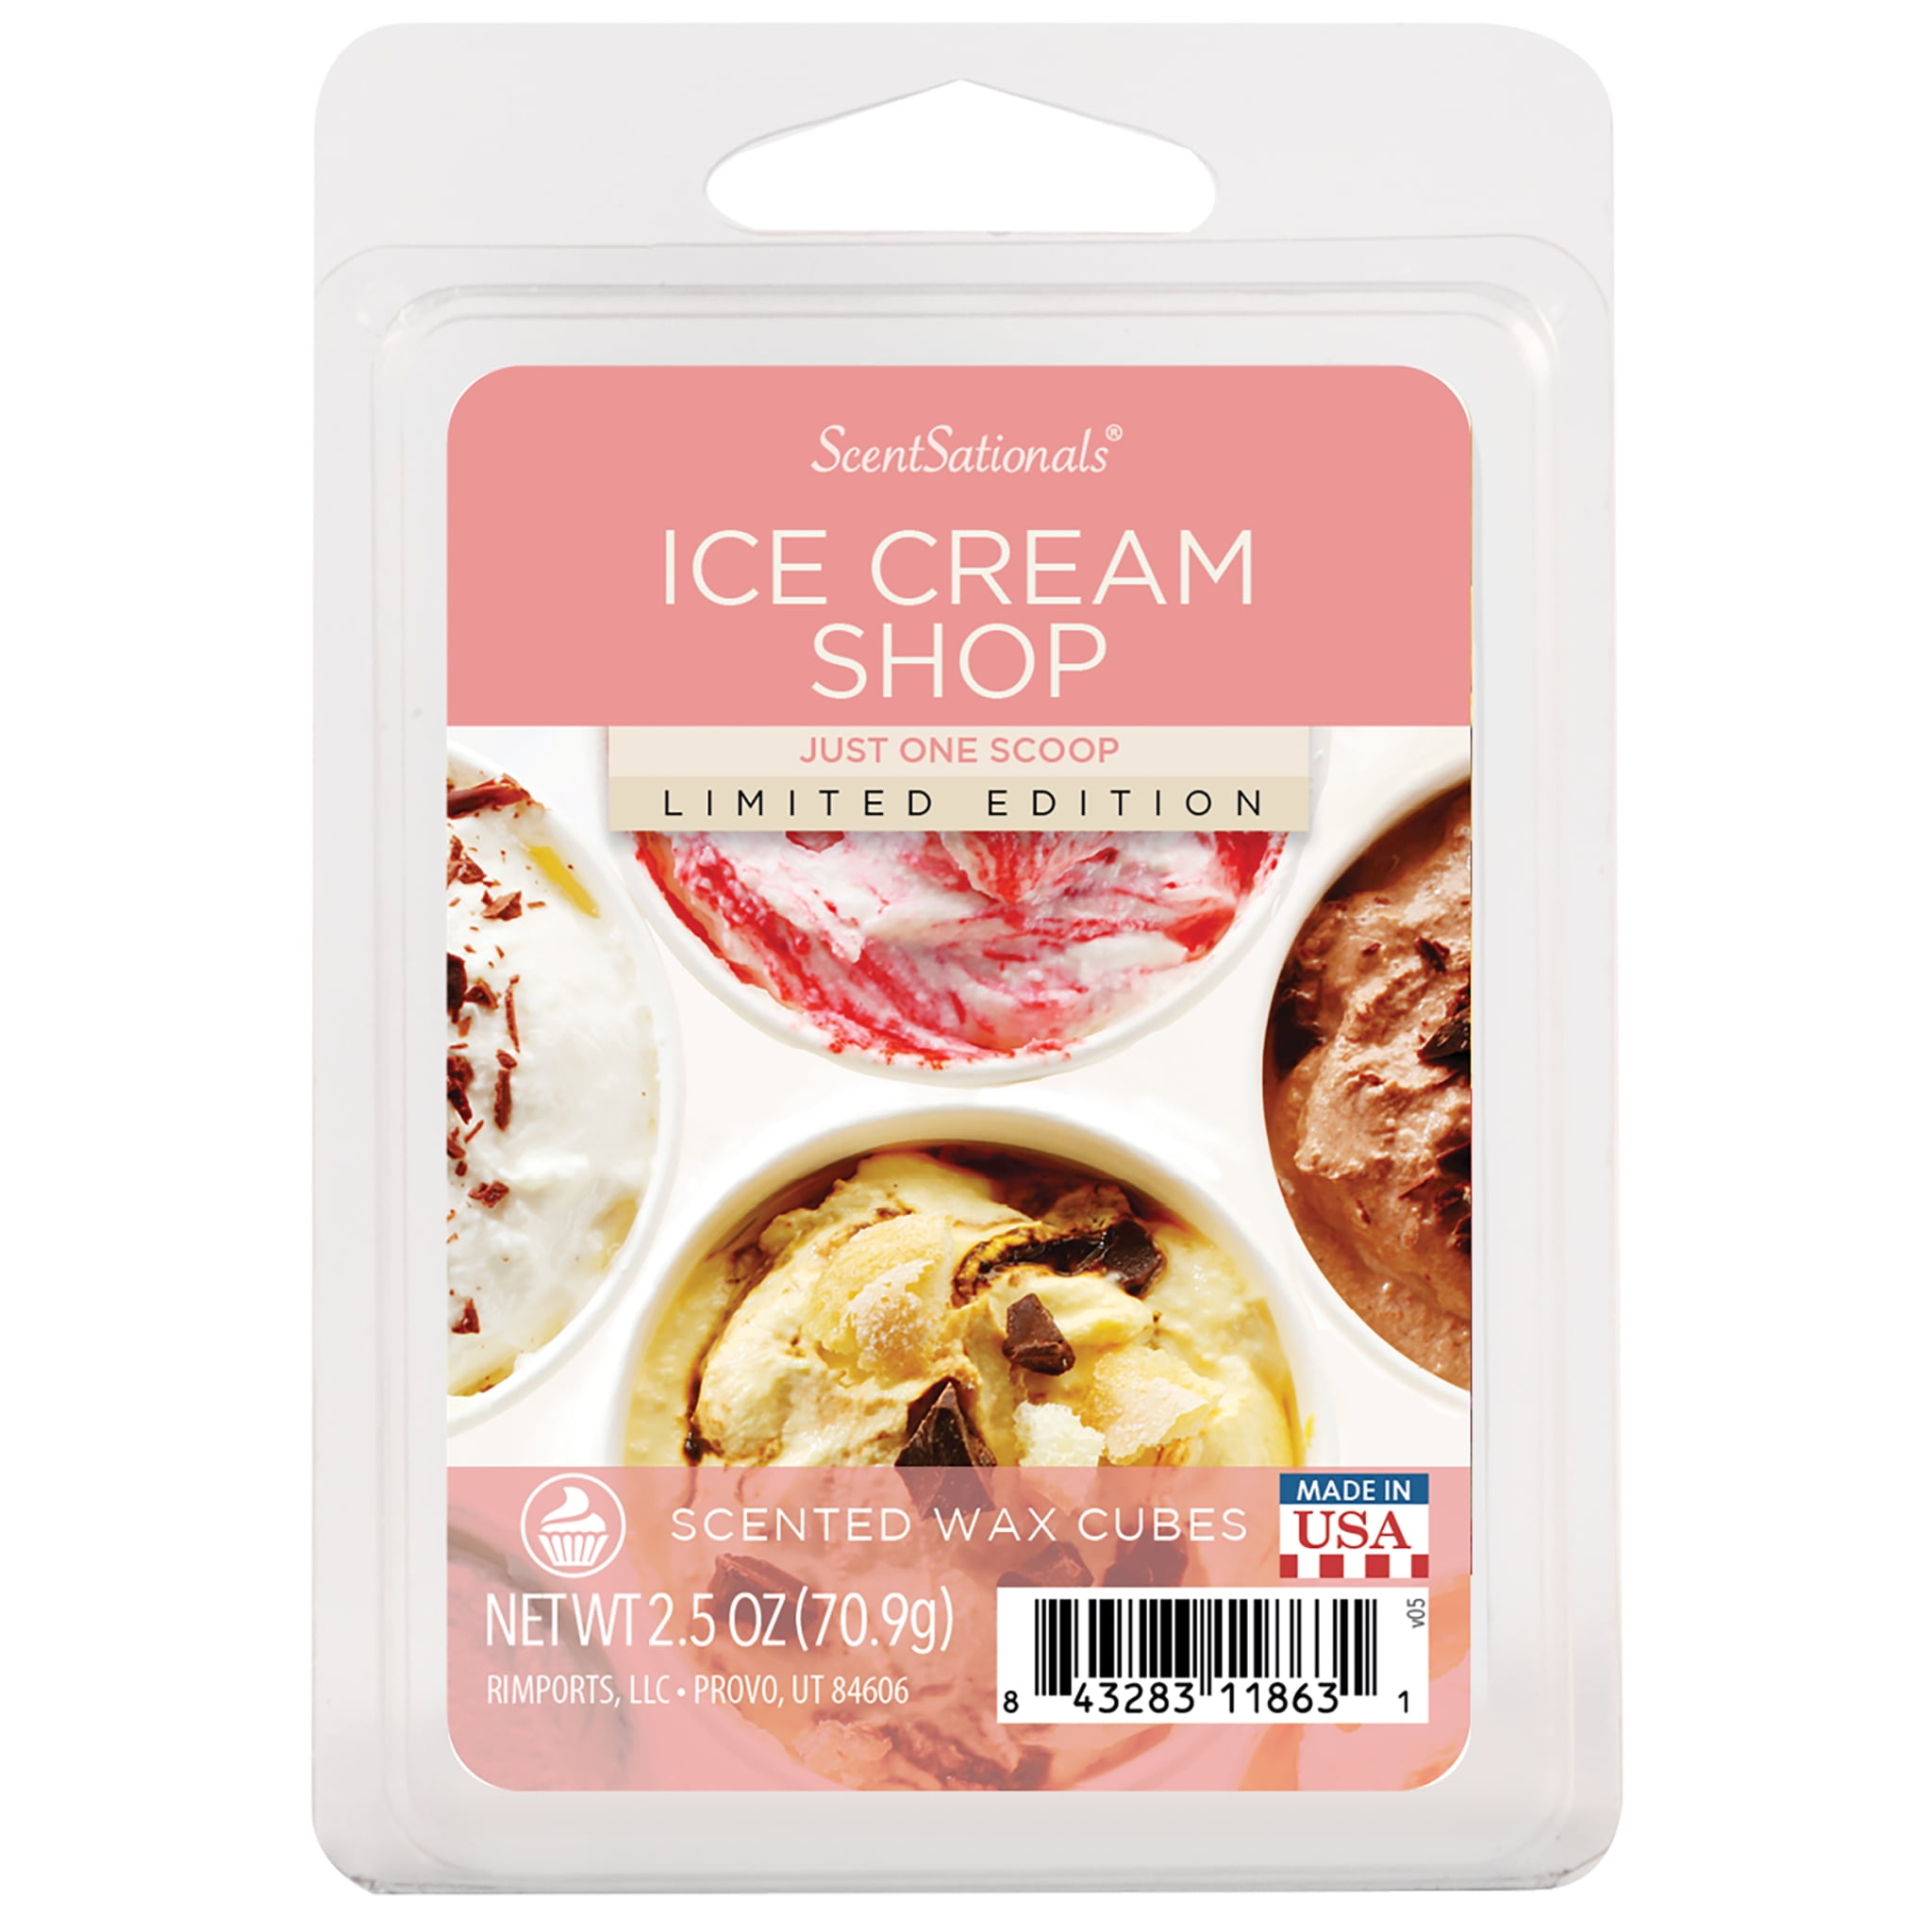 Ice Cream Shop Scented Wax Melts Scentsationals 2 5 Oz 1 Pack